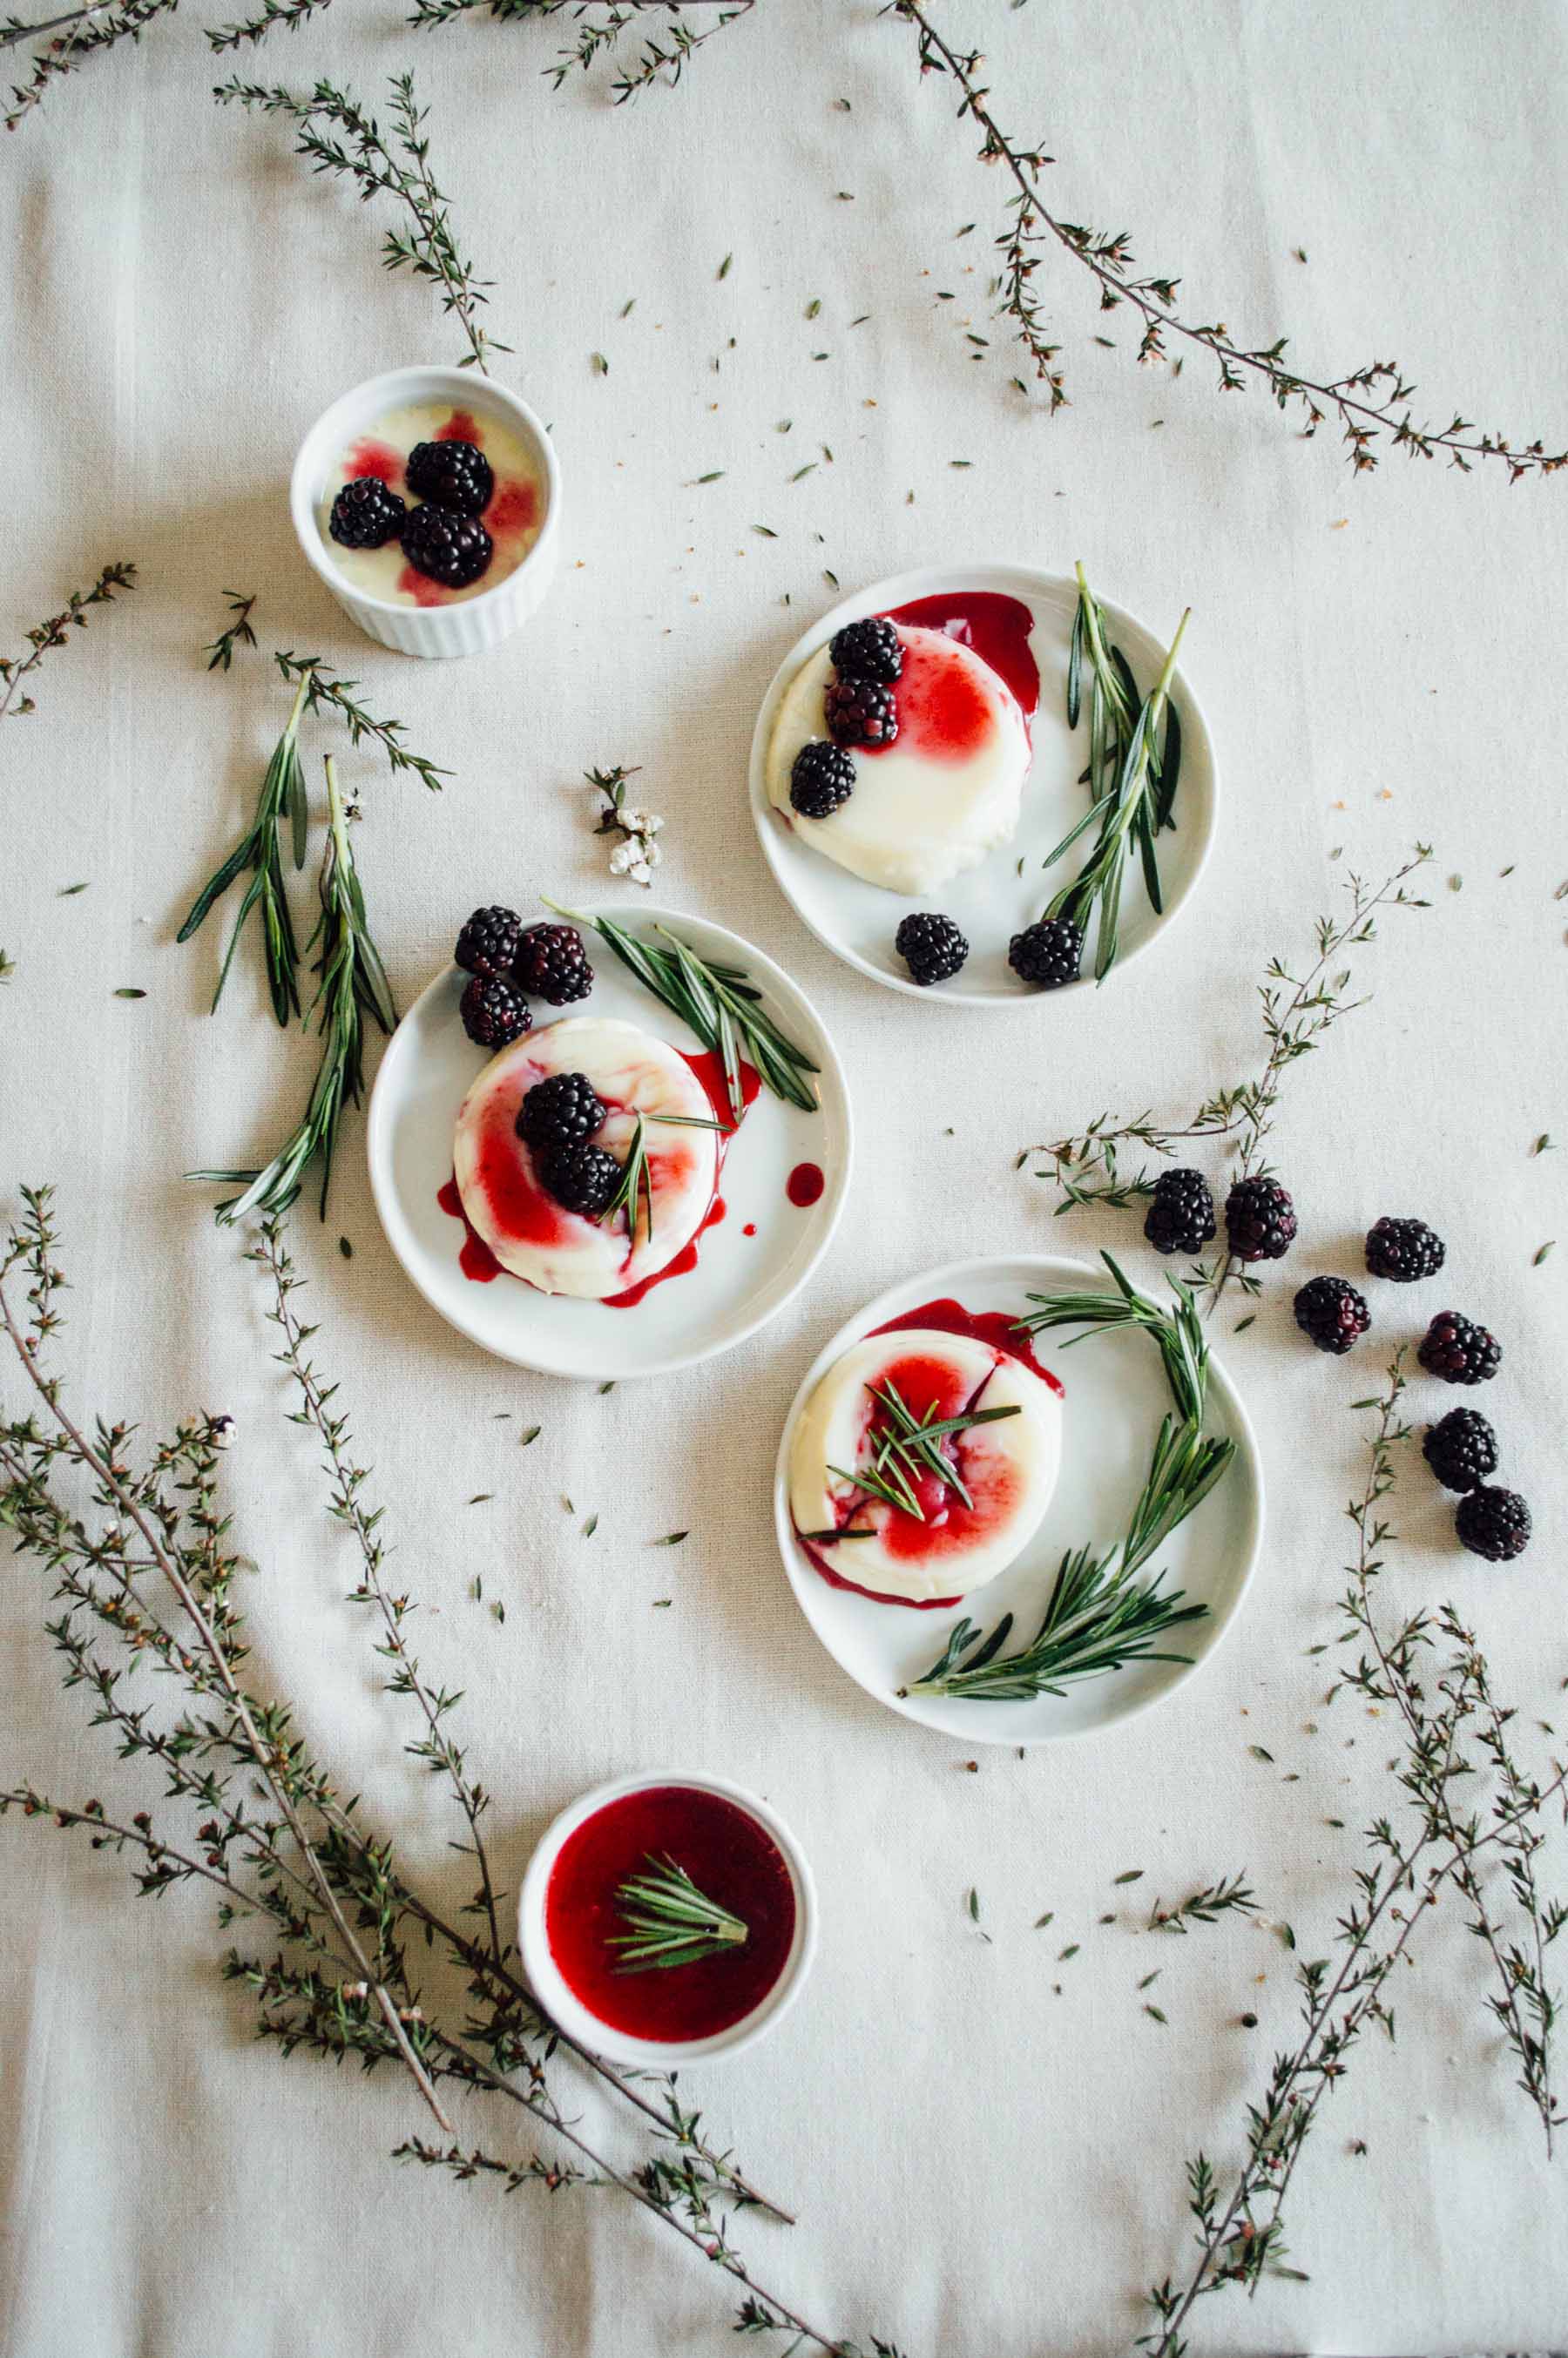 Lavender Panna Cotta recipe with Blackberry, Rosemary, & Gin Syrup. Super easy to make and perfect for Spring! | By Gabriella